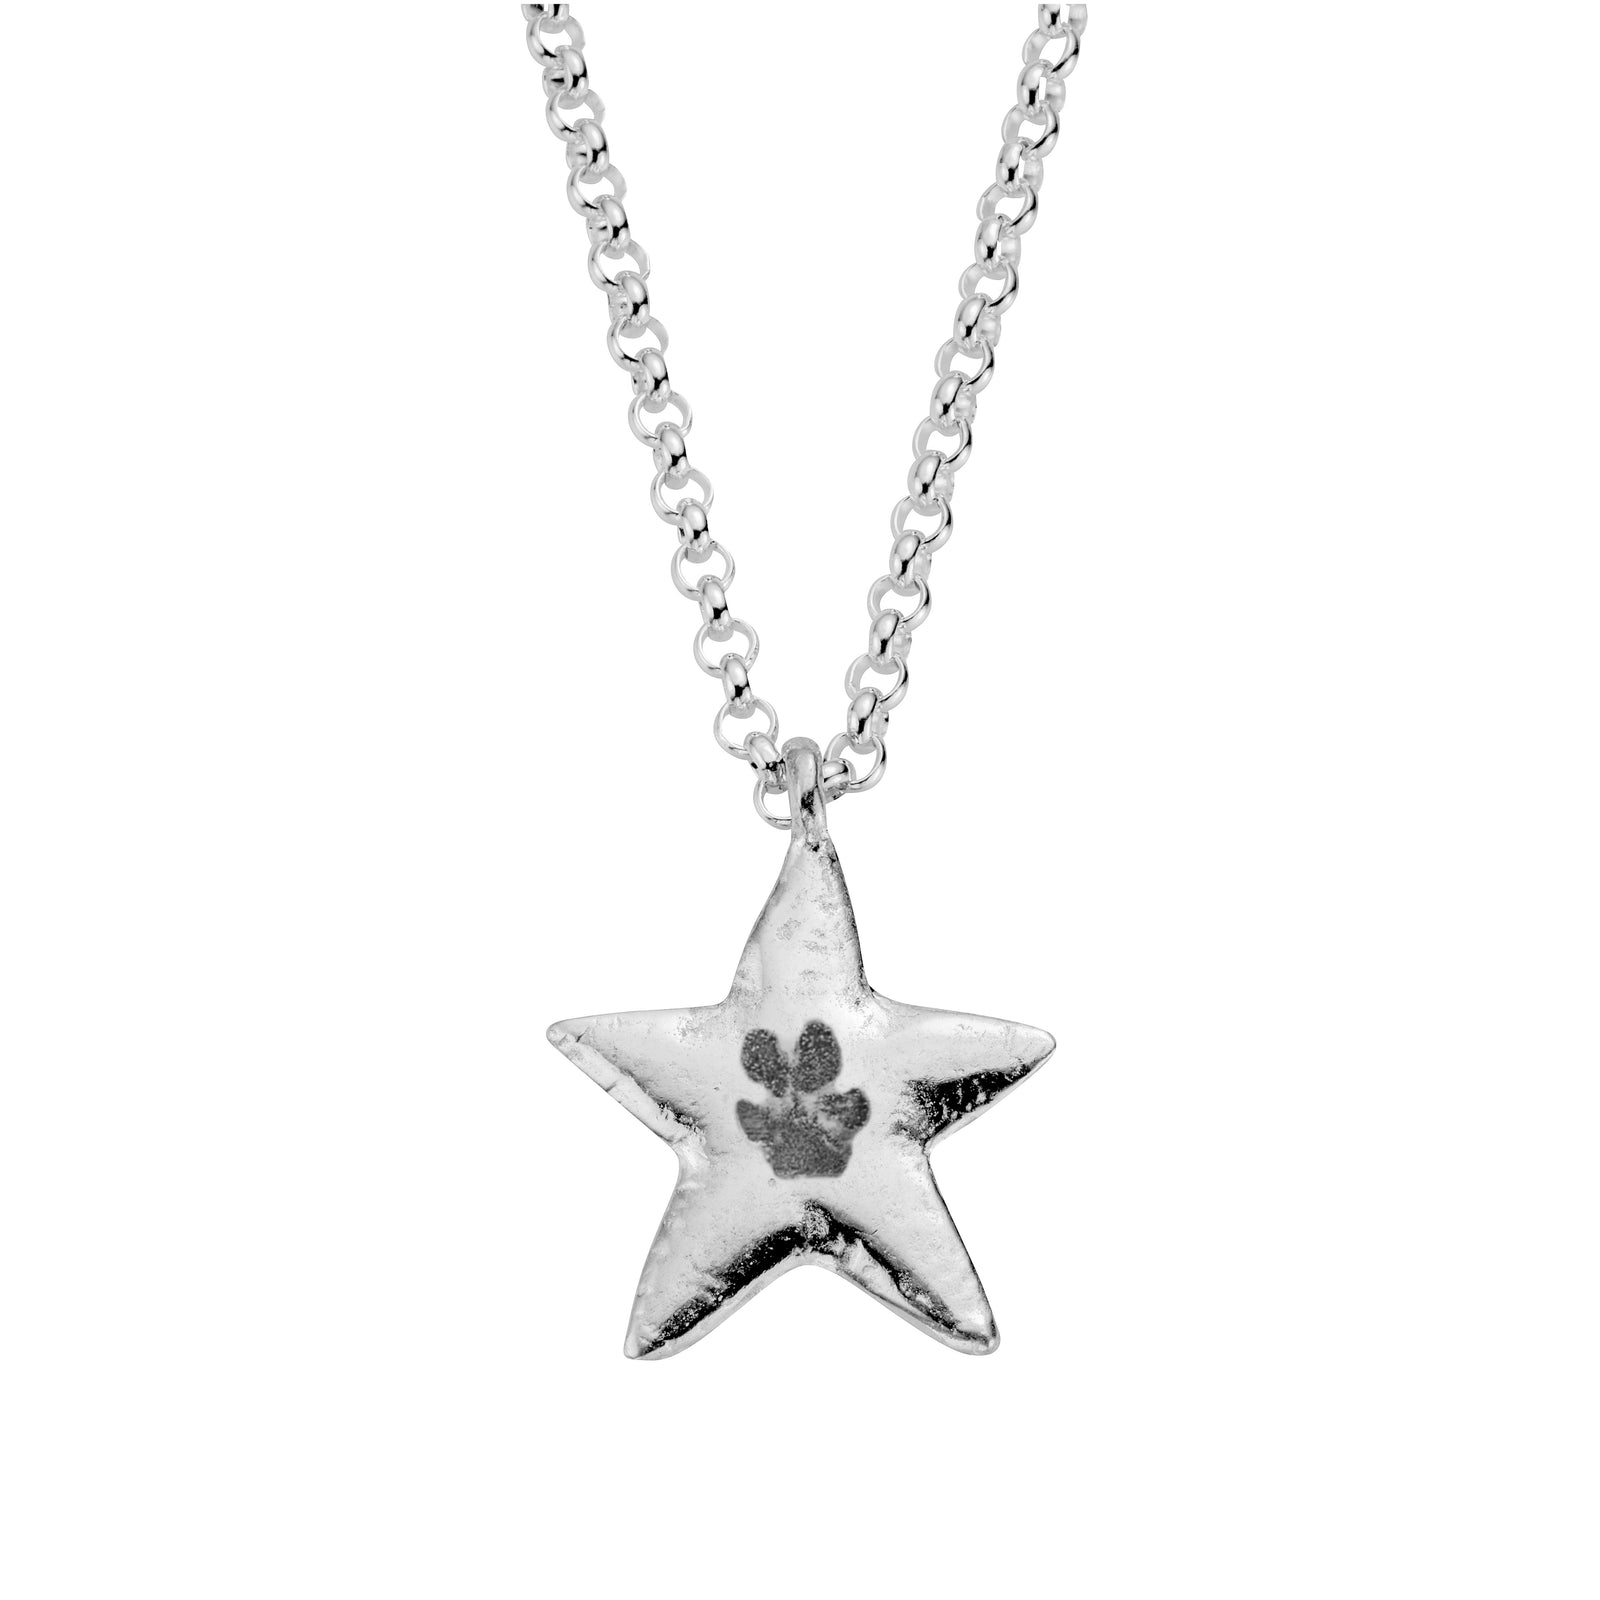 Silver Maxi Star Necklace with Paw Print